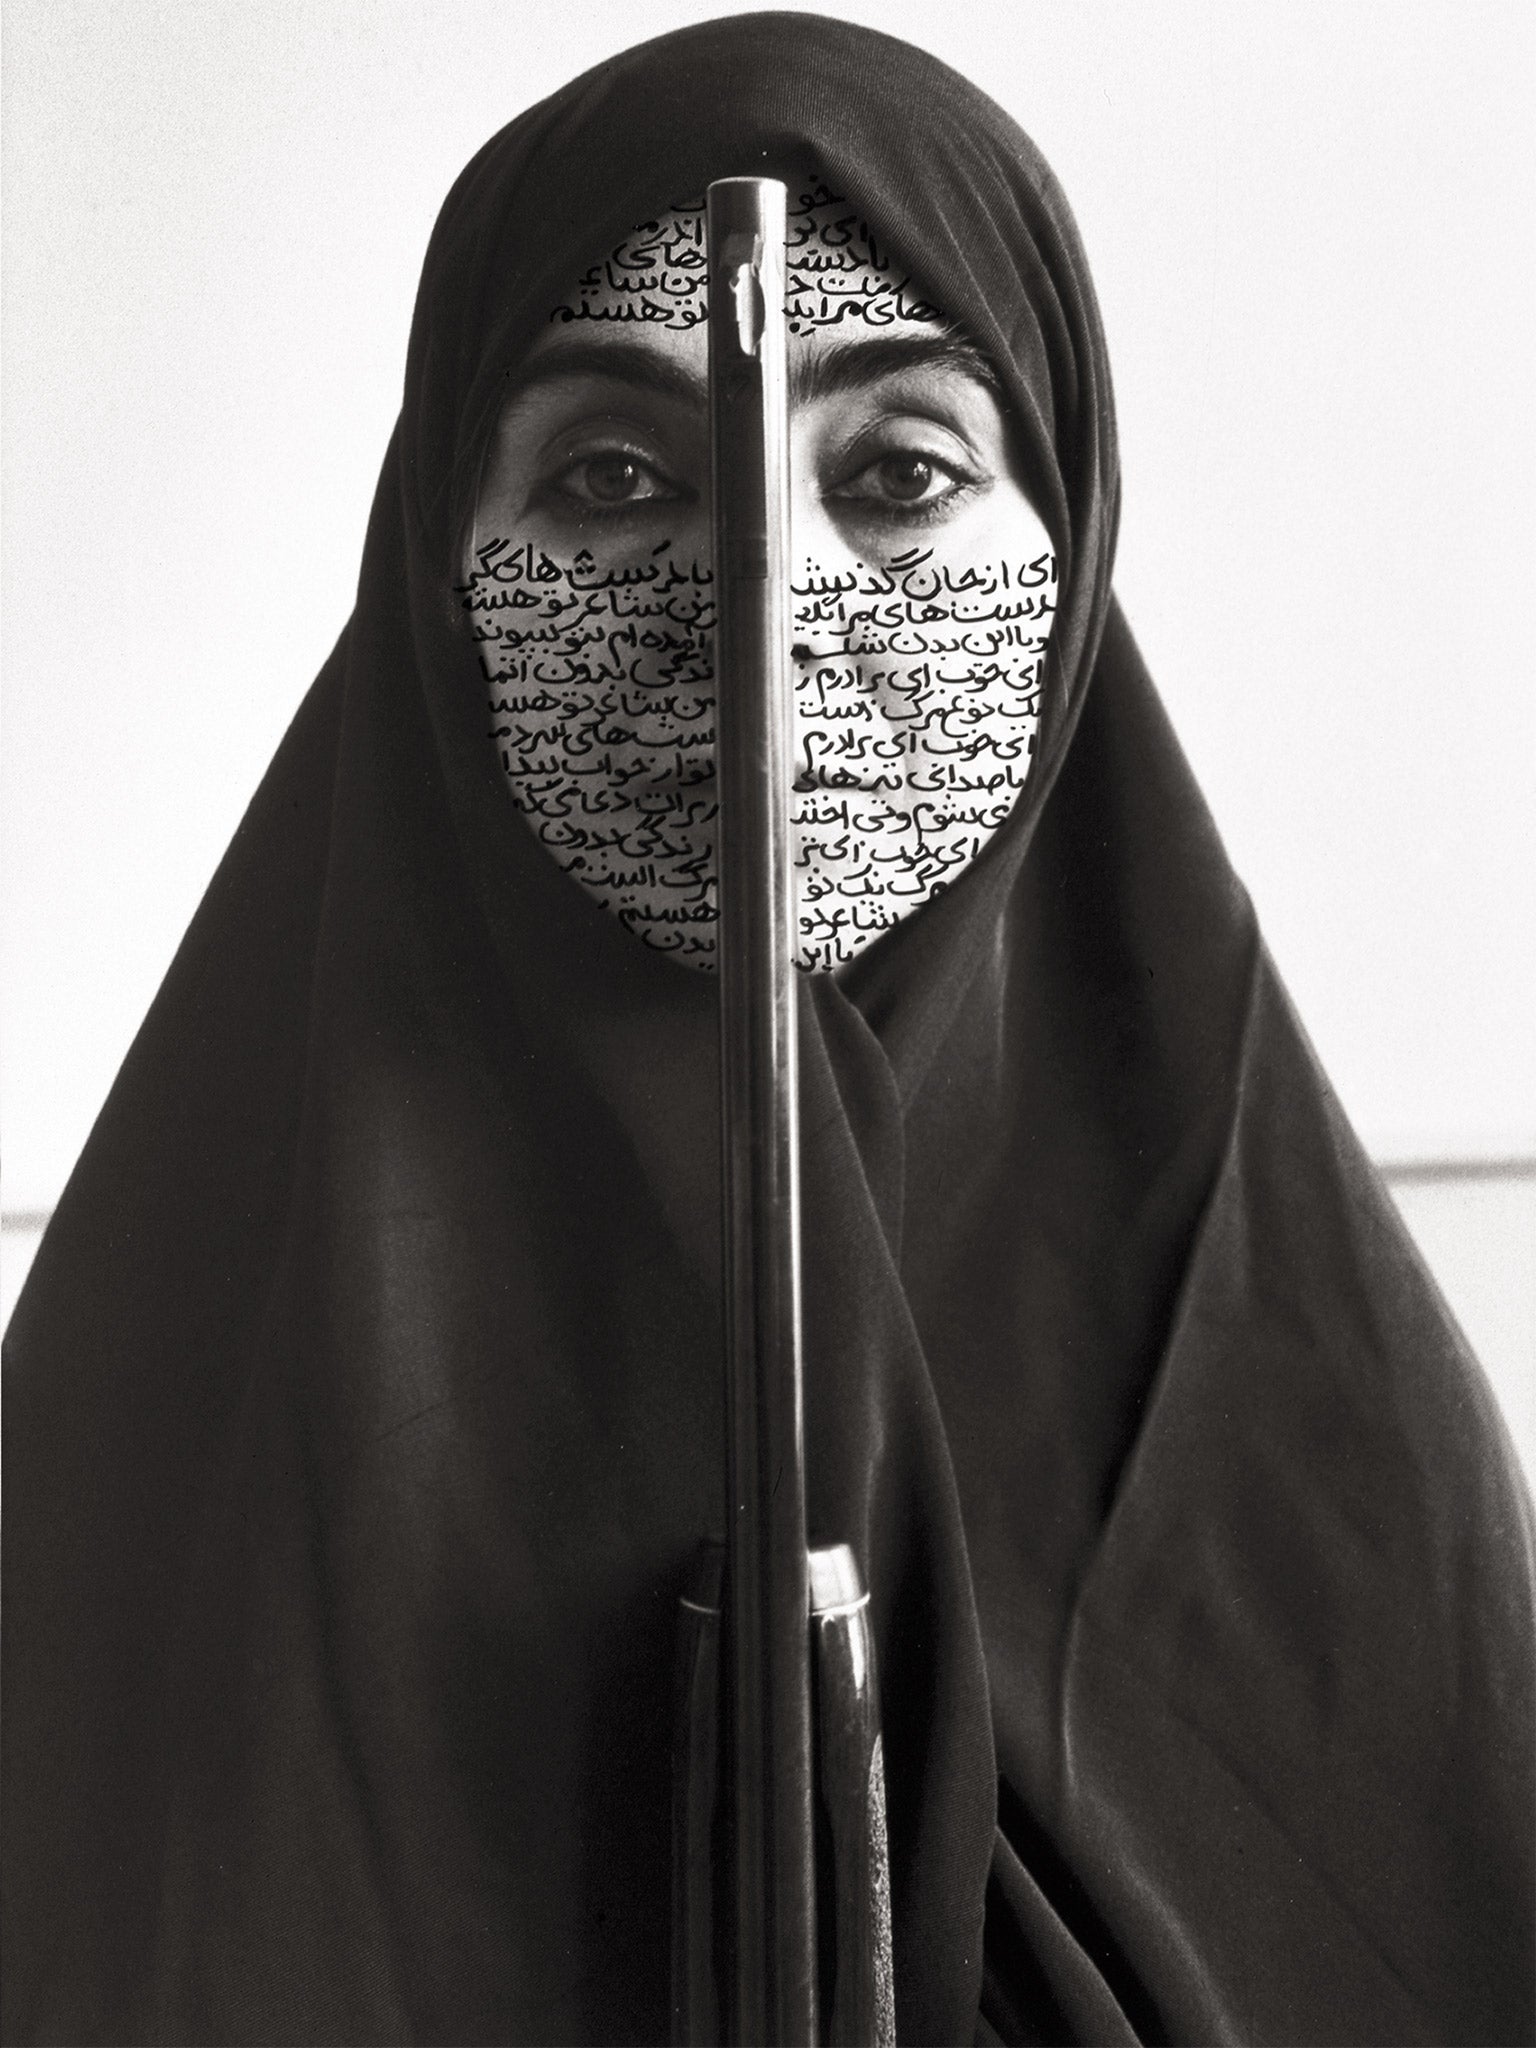 SHIRIN NESHAT: REBELLIOUS SILENCE (1994) ‘For Shirin Neshat’s series of photographs ‘Women of Allah’, from 1994, the Iranian artist inscribed Persian calligraphy across images of her own body, creating a kind of second skin of lyrical and political defiance’